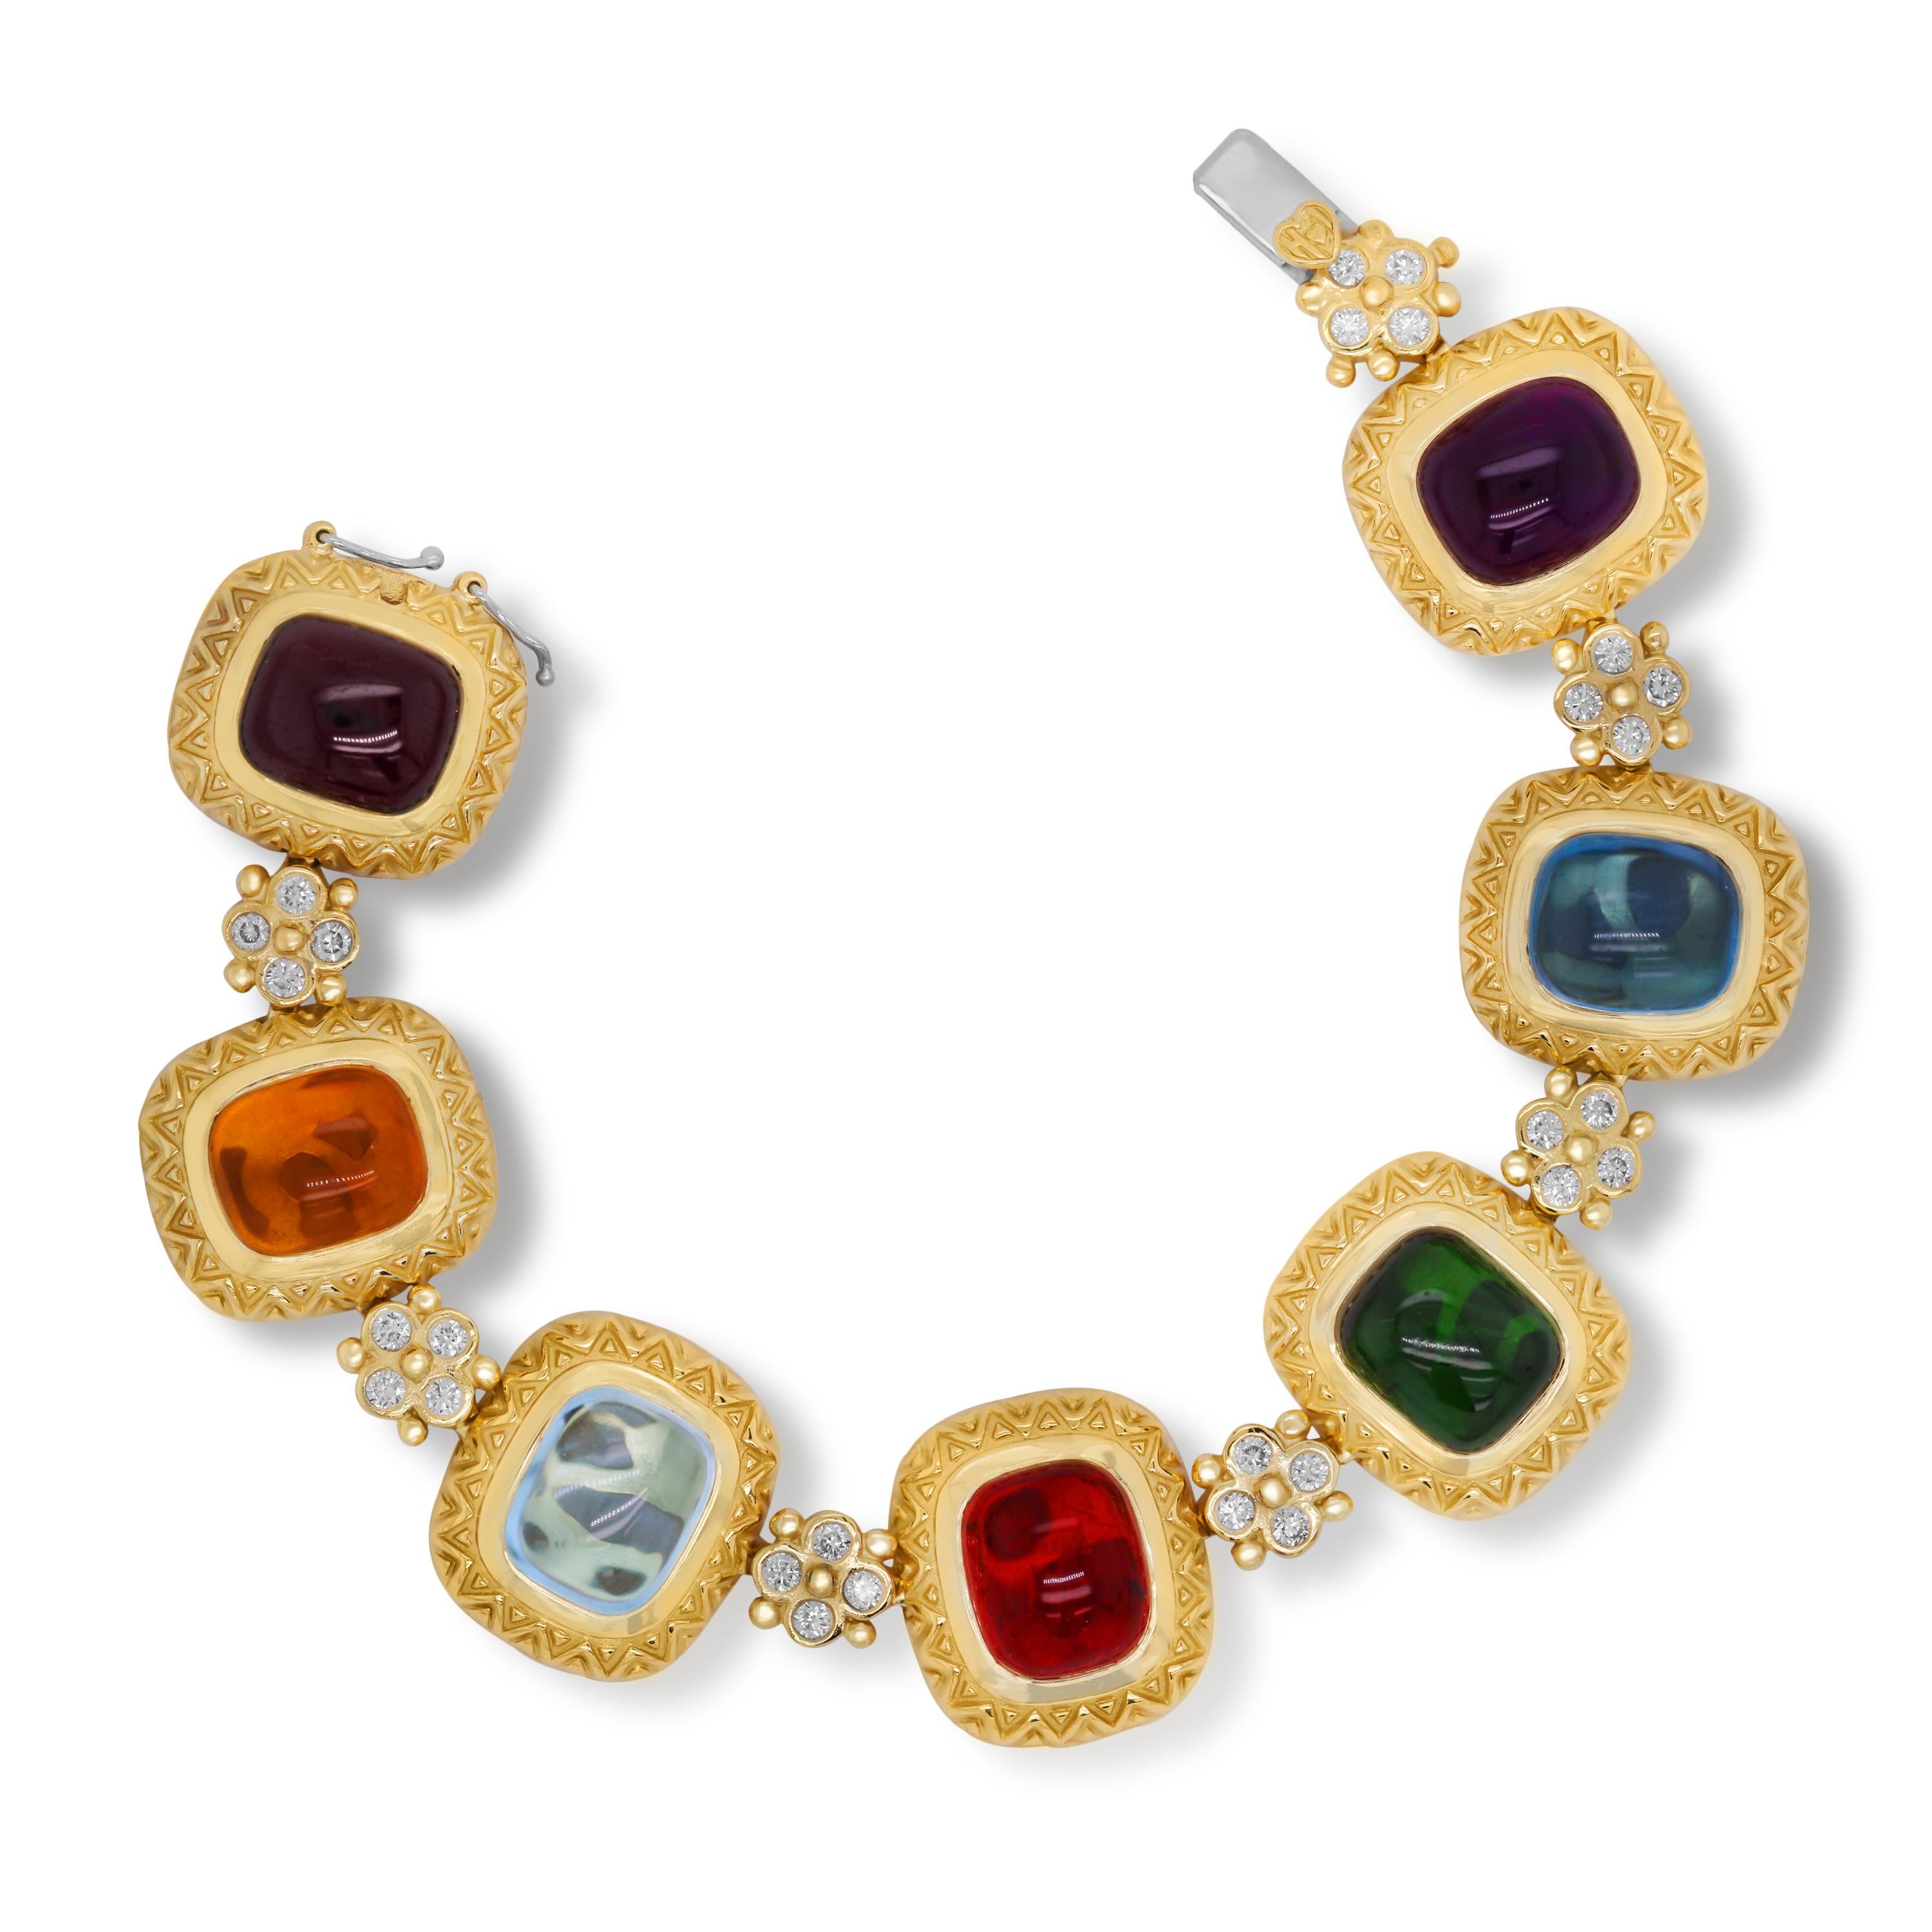 Stambolian 18K Yellow Gold Diamond Cabochon Tourmaline Vintage Bracelet

This vintage bracelet from Stambolian was a part of the Fall 2009 collection and features cabochon-cut Tourmalines, with diamond clusters connecting each section.

Apprx. 48